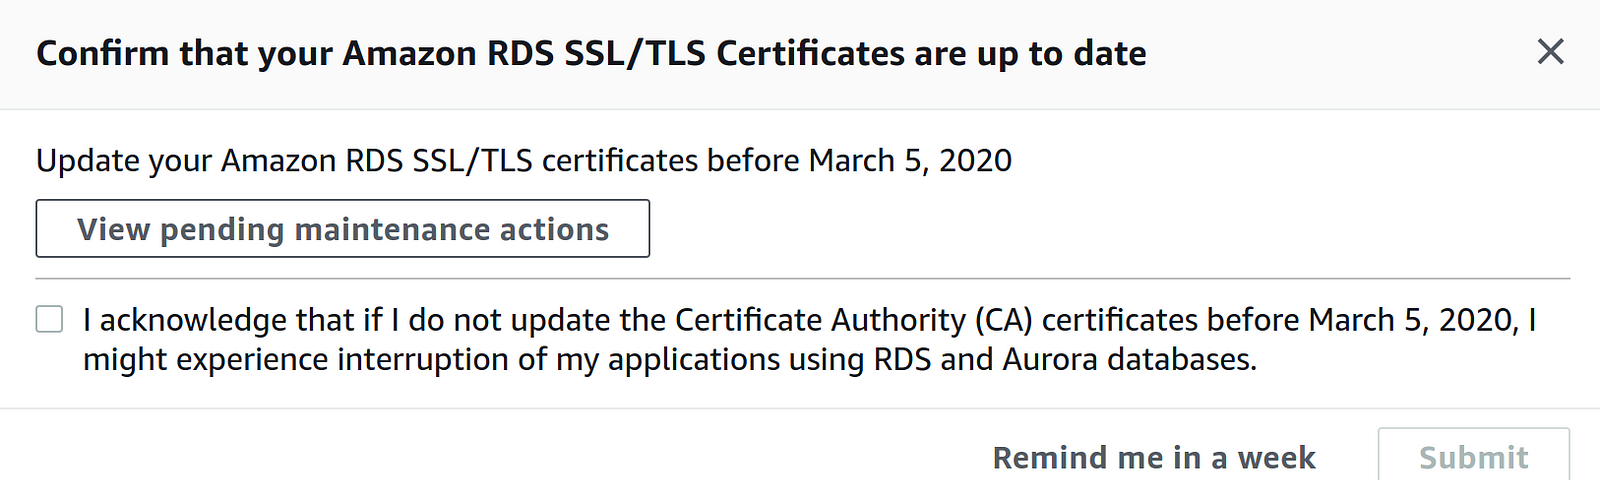 Screenshot of on-screen alert, titled “Confirm that your Amazon RDS SSL/TLS Certificates are up to date”